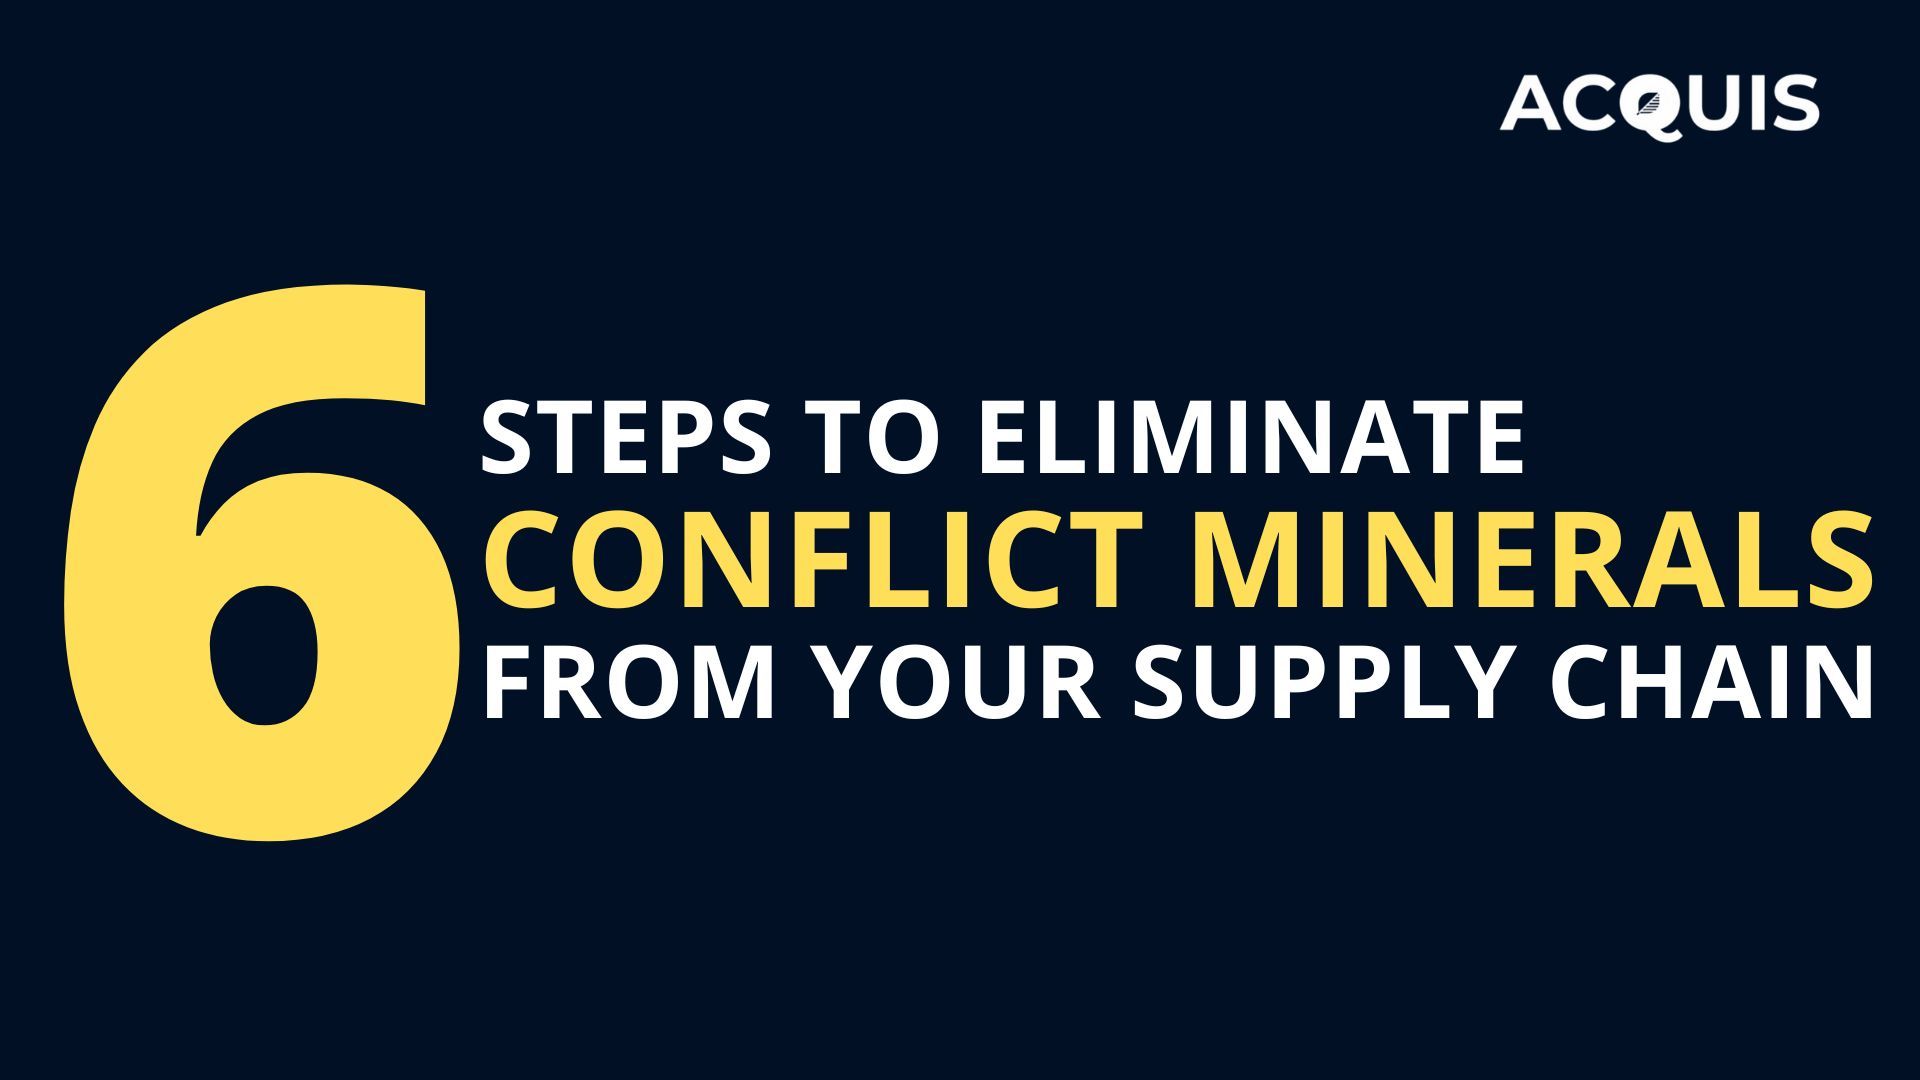 6 Steps to Eliminate Conflict Minerals from Your Supply Chain